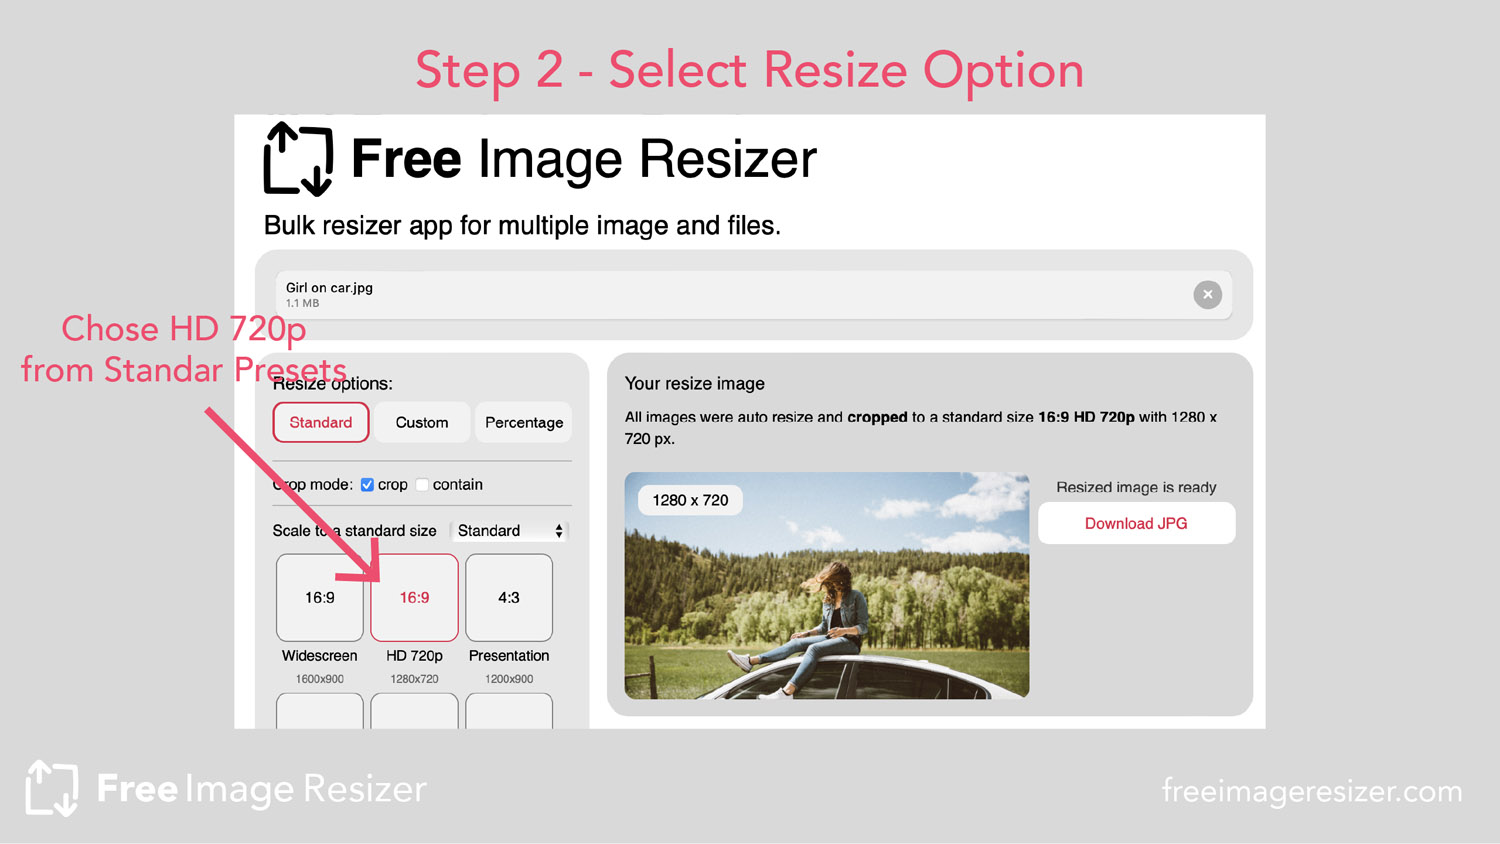 Bulk-resize images to 720p or 1920x720 using an online tool